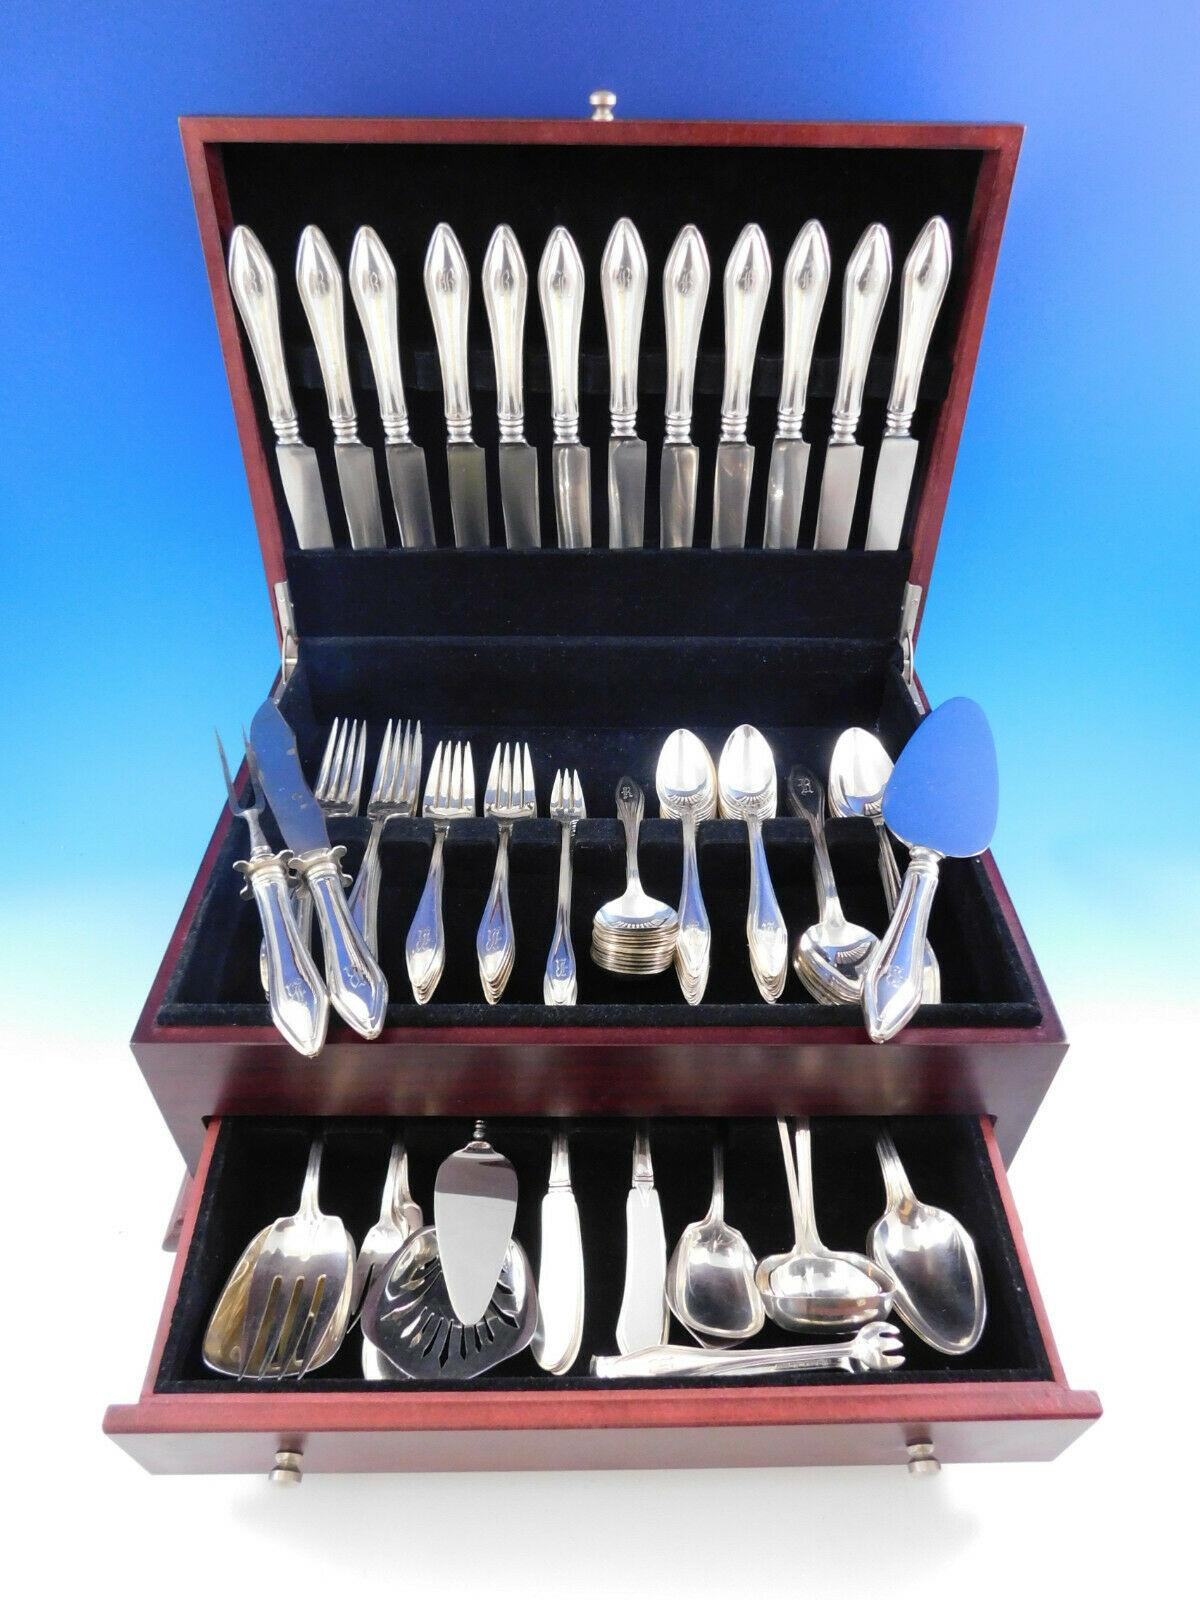 Monumental Mary Chilton by Towle Sterling Silver flatware set - 126 pieces. This set includes:

12 knives, 9